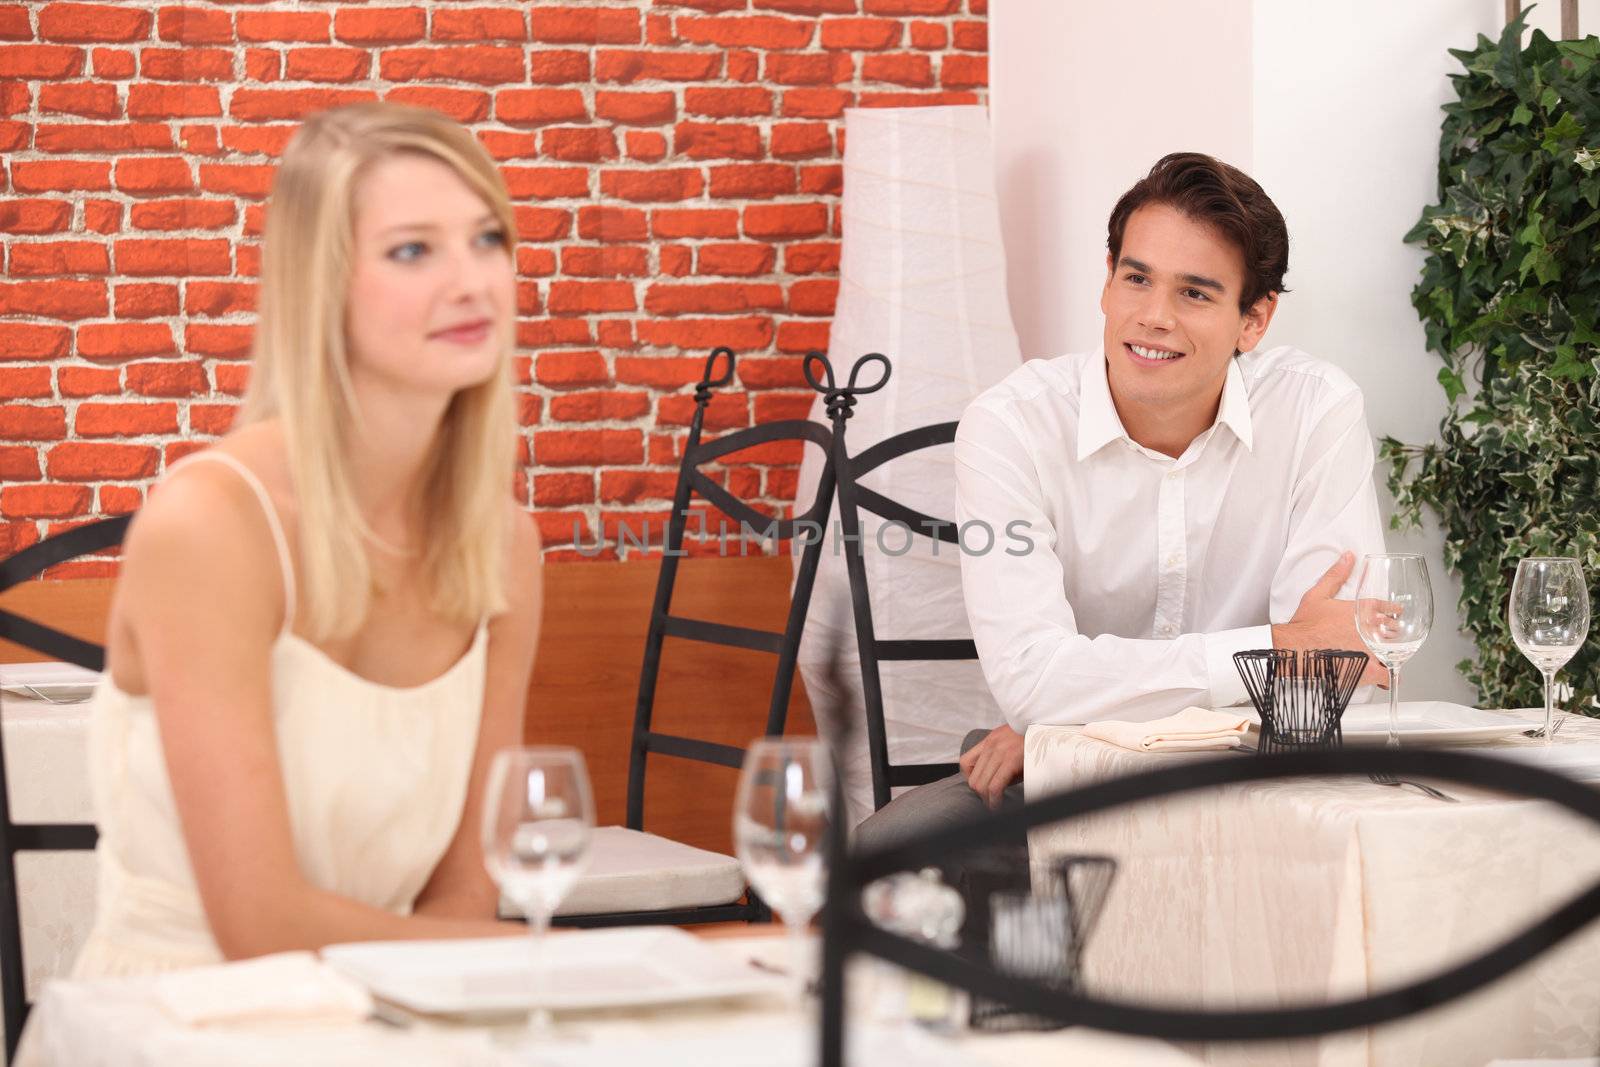 Man observing pretty lady in a restaurant